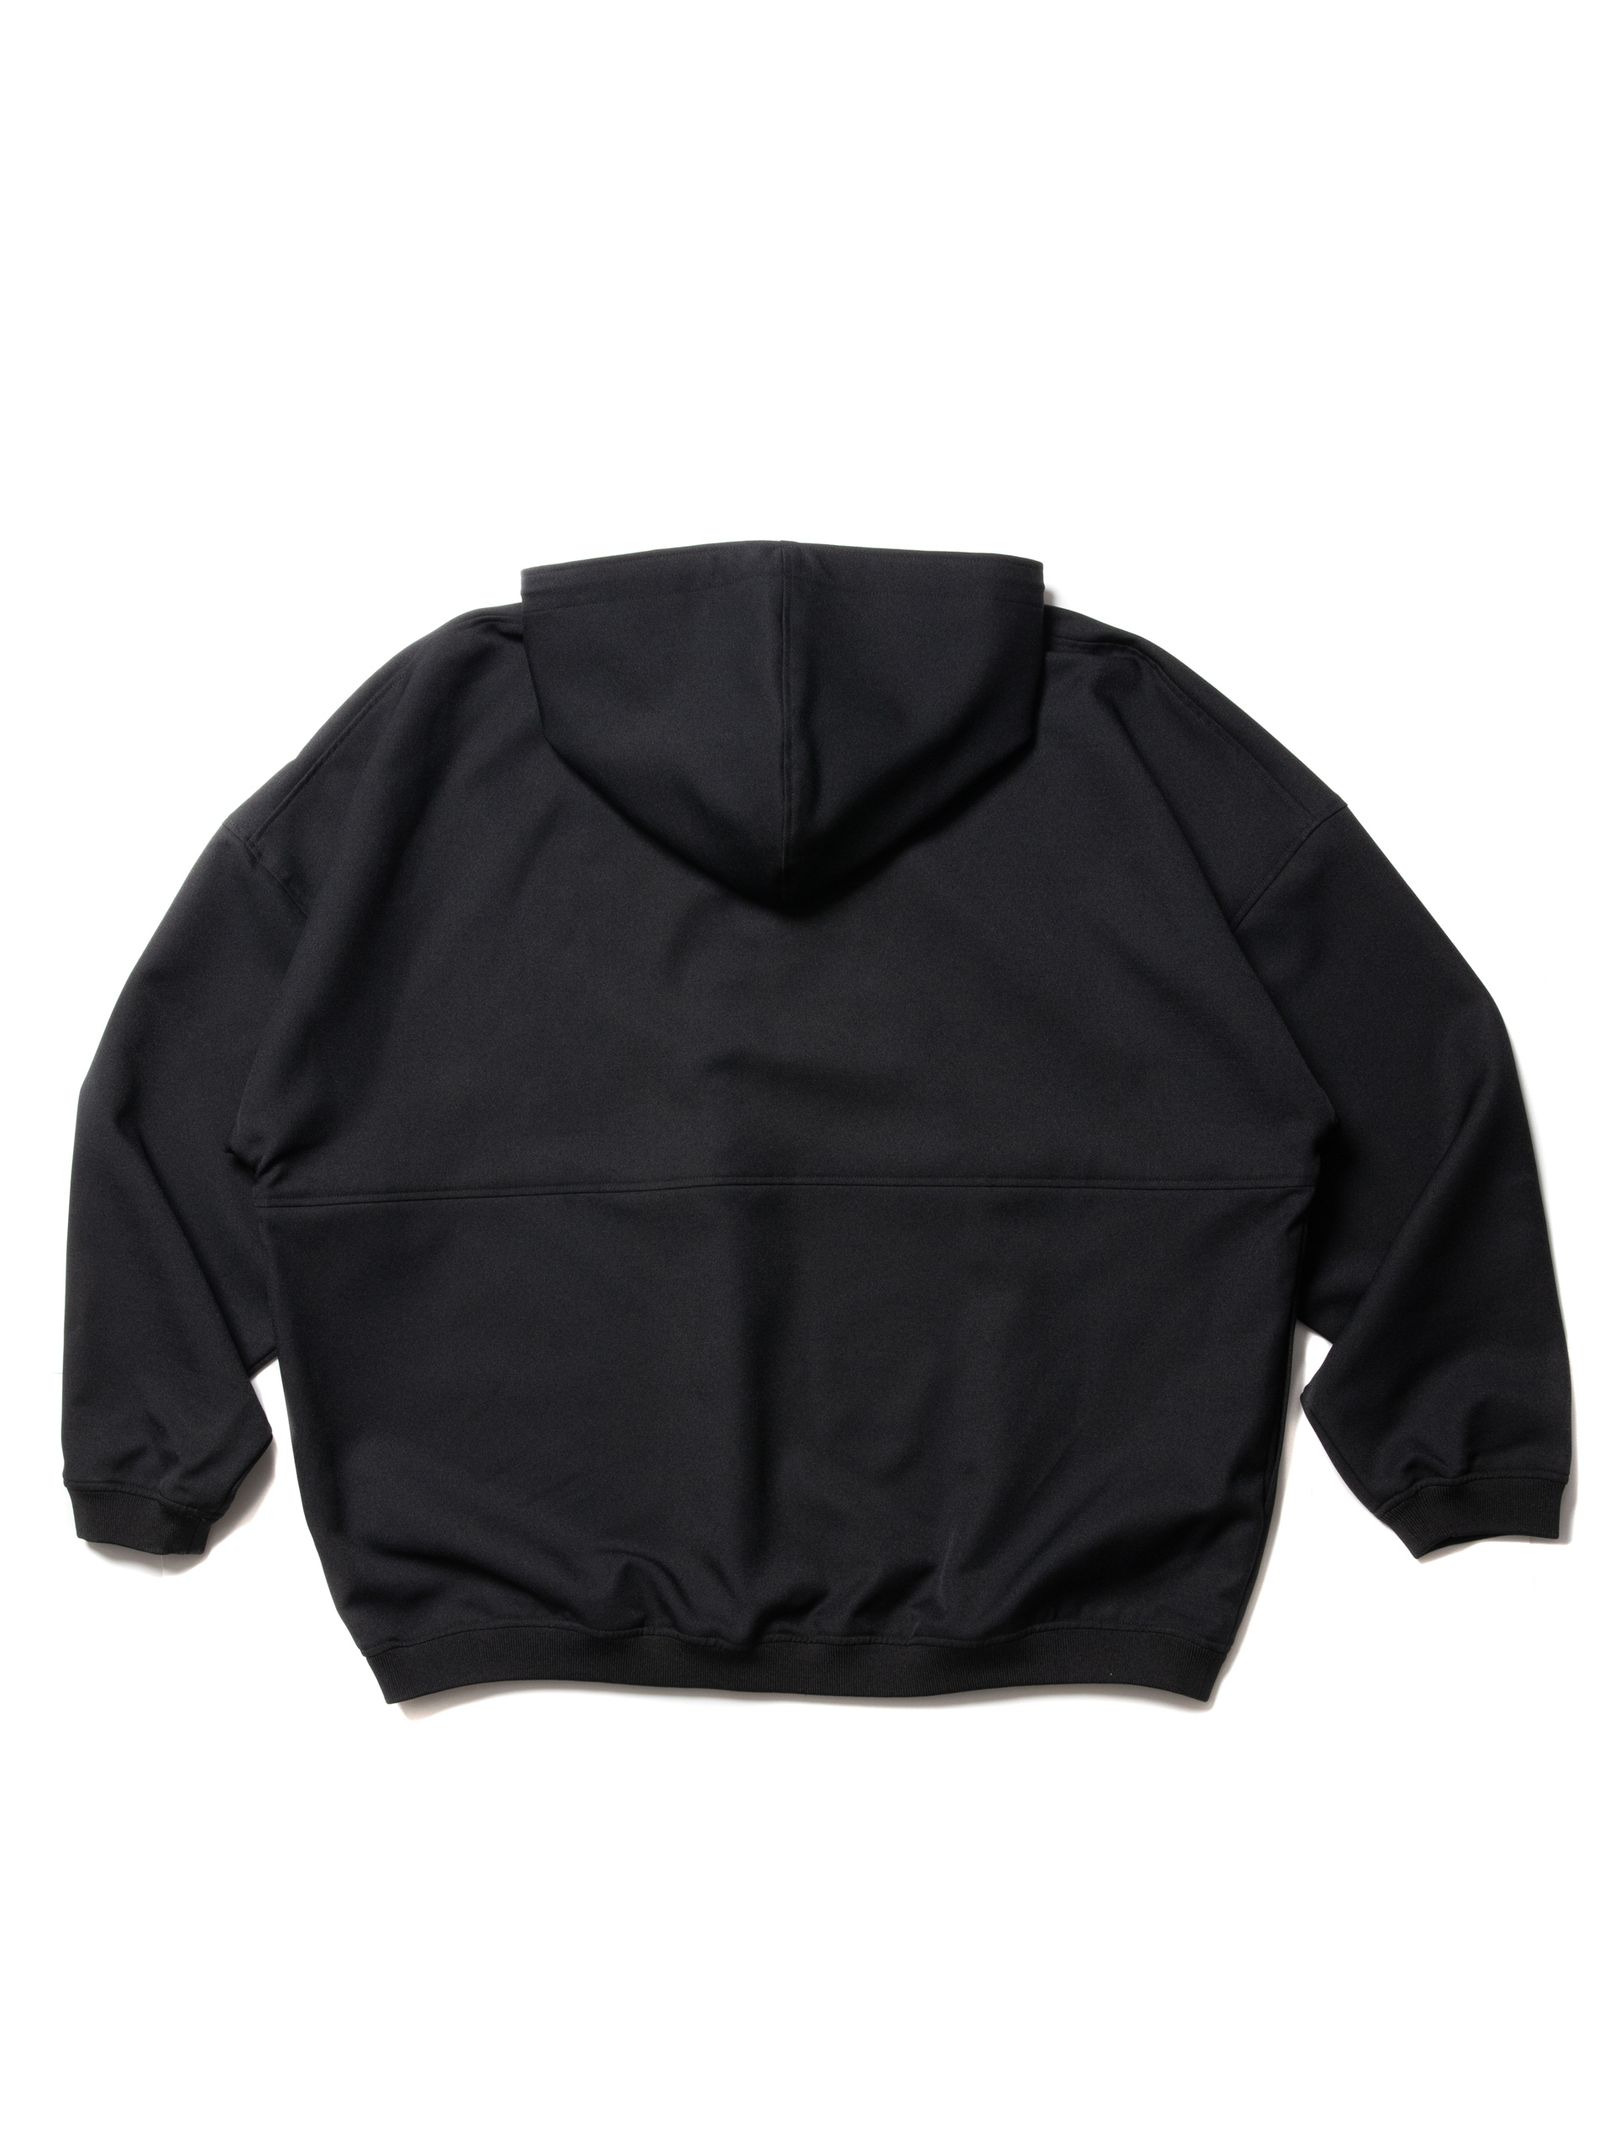 COOTIE PRODUCTIONS - Polyester Twill Half Zip Hoodie (BLACK